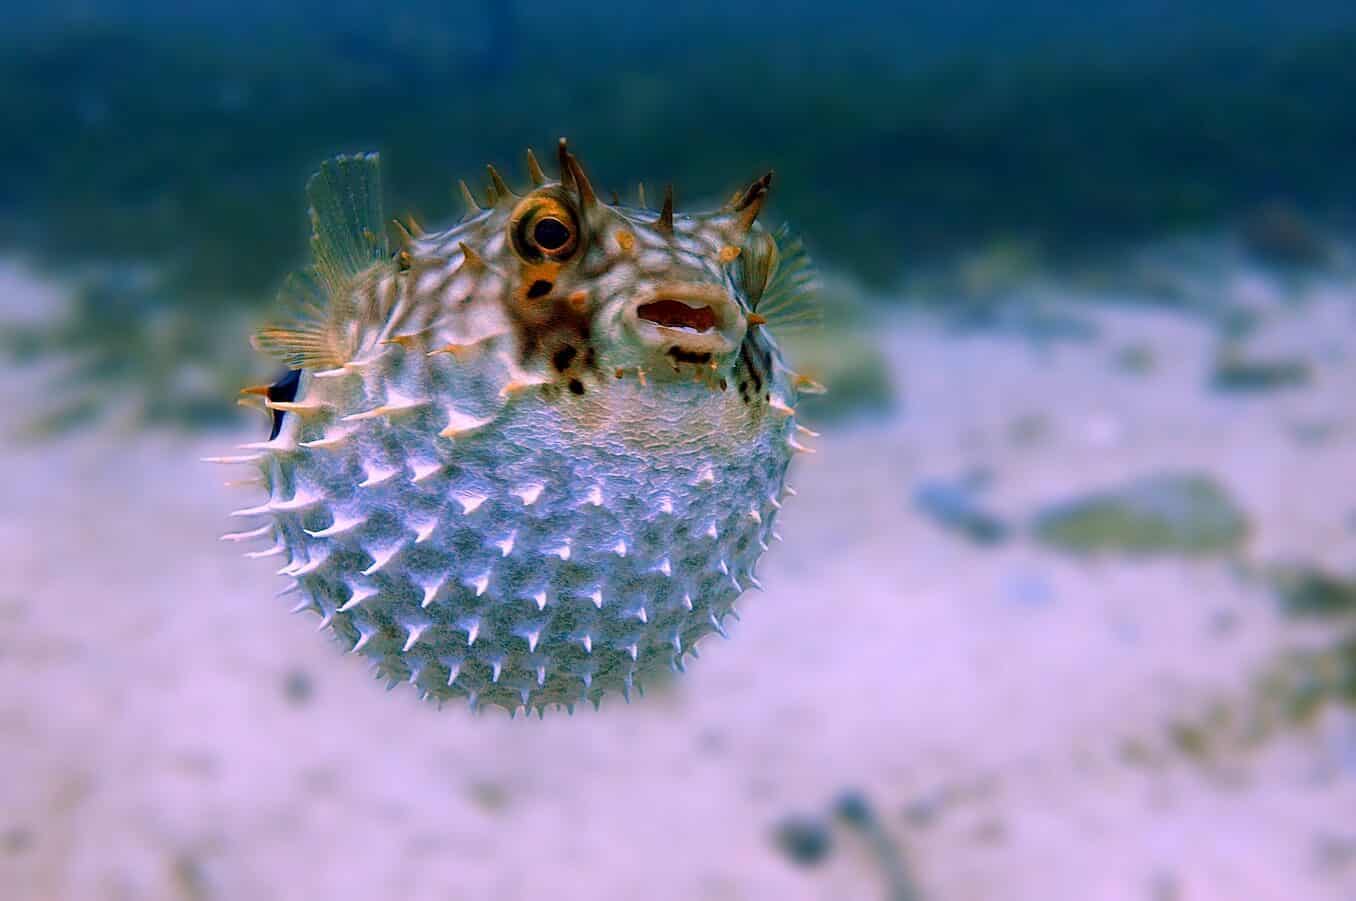 white and brown pufferfish in close up photography